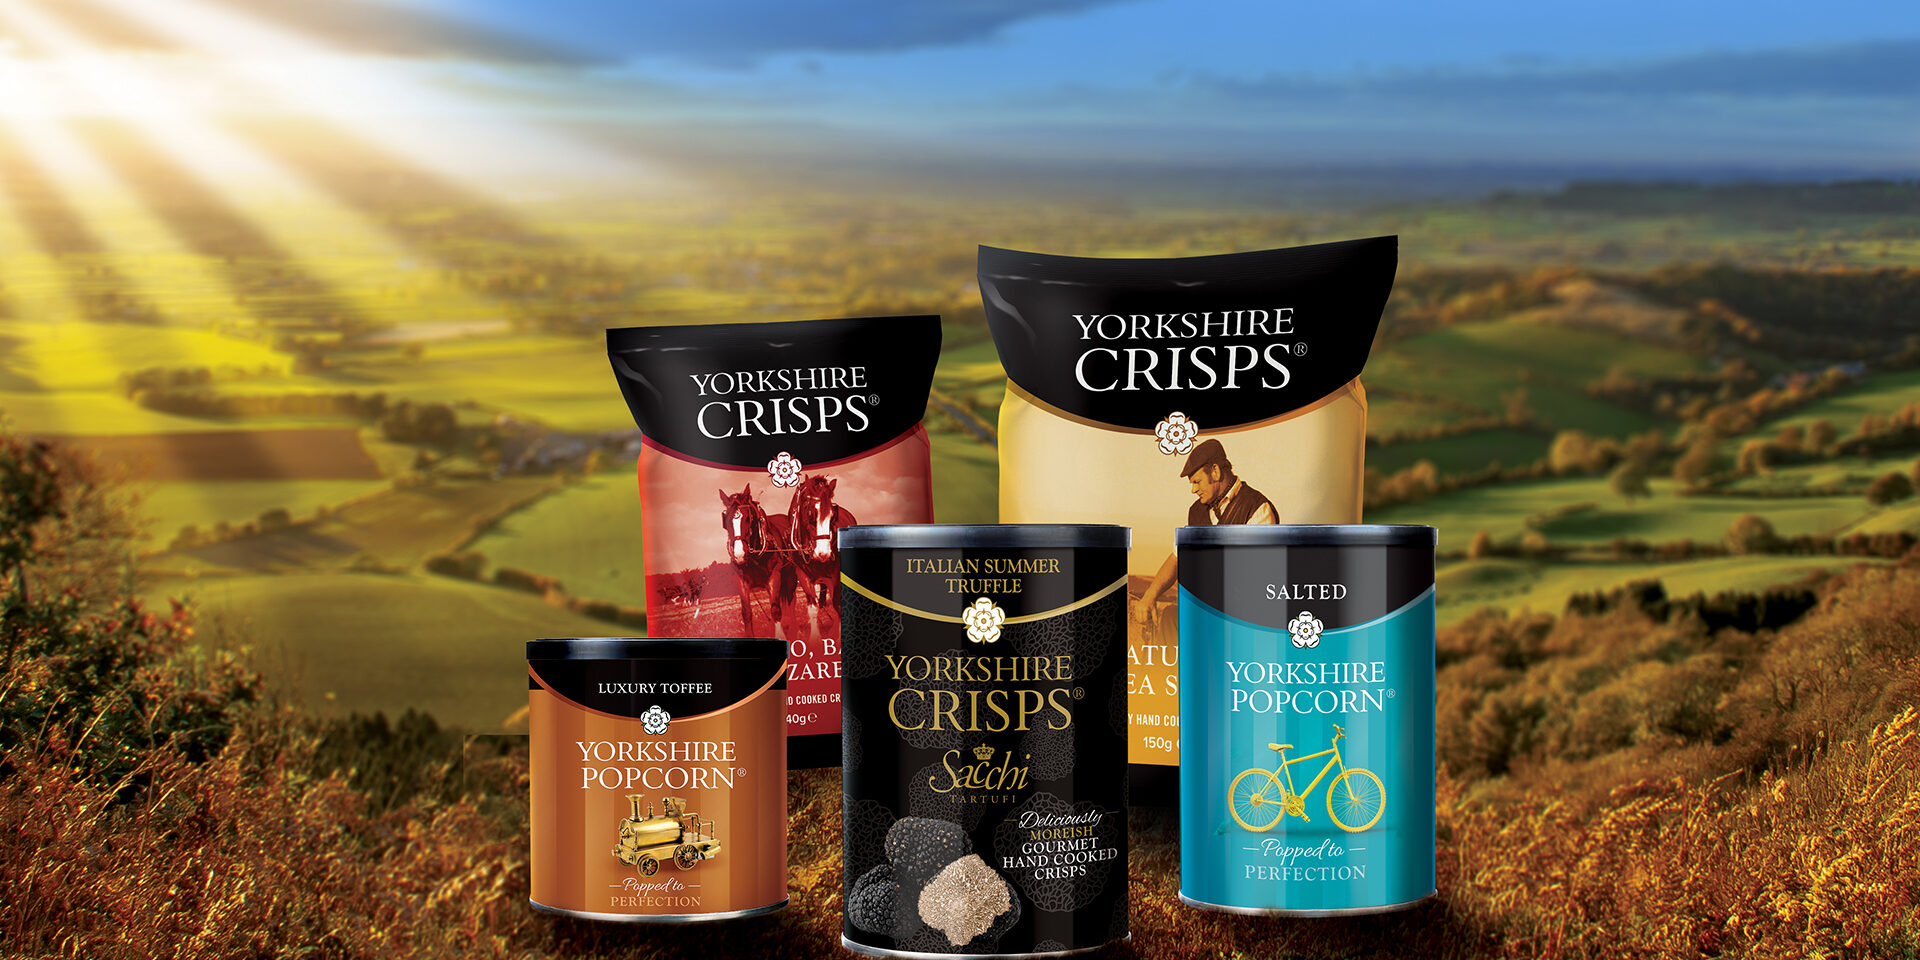 Welcome to The Yorkshire Crisp Company